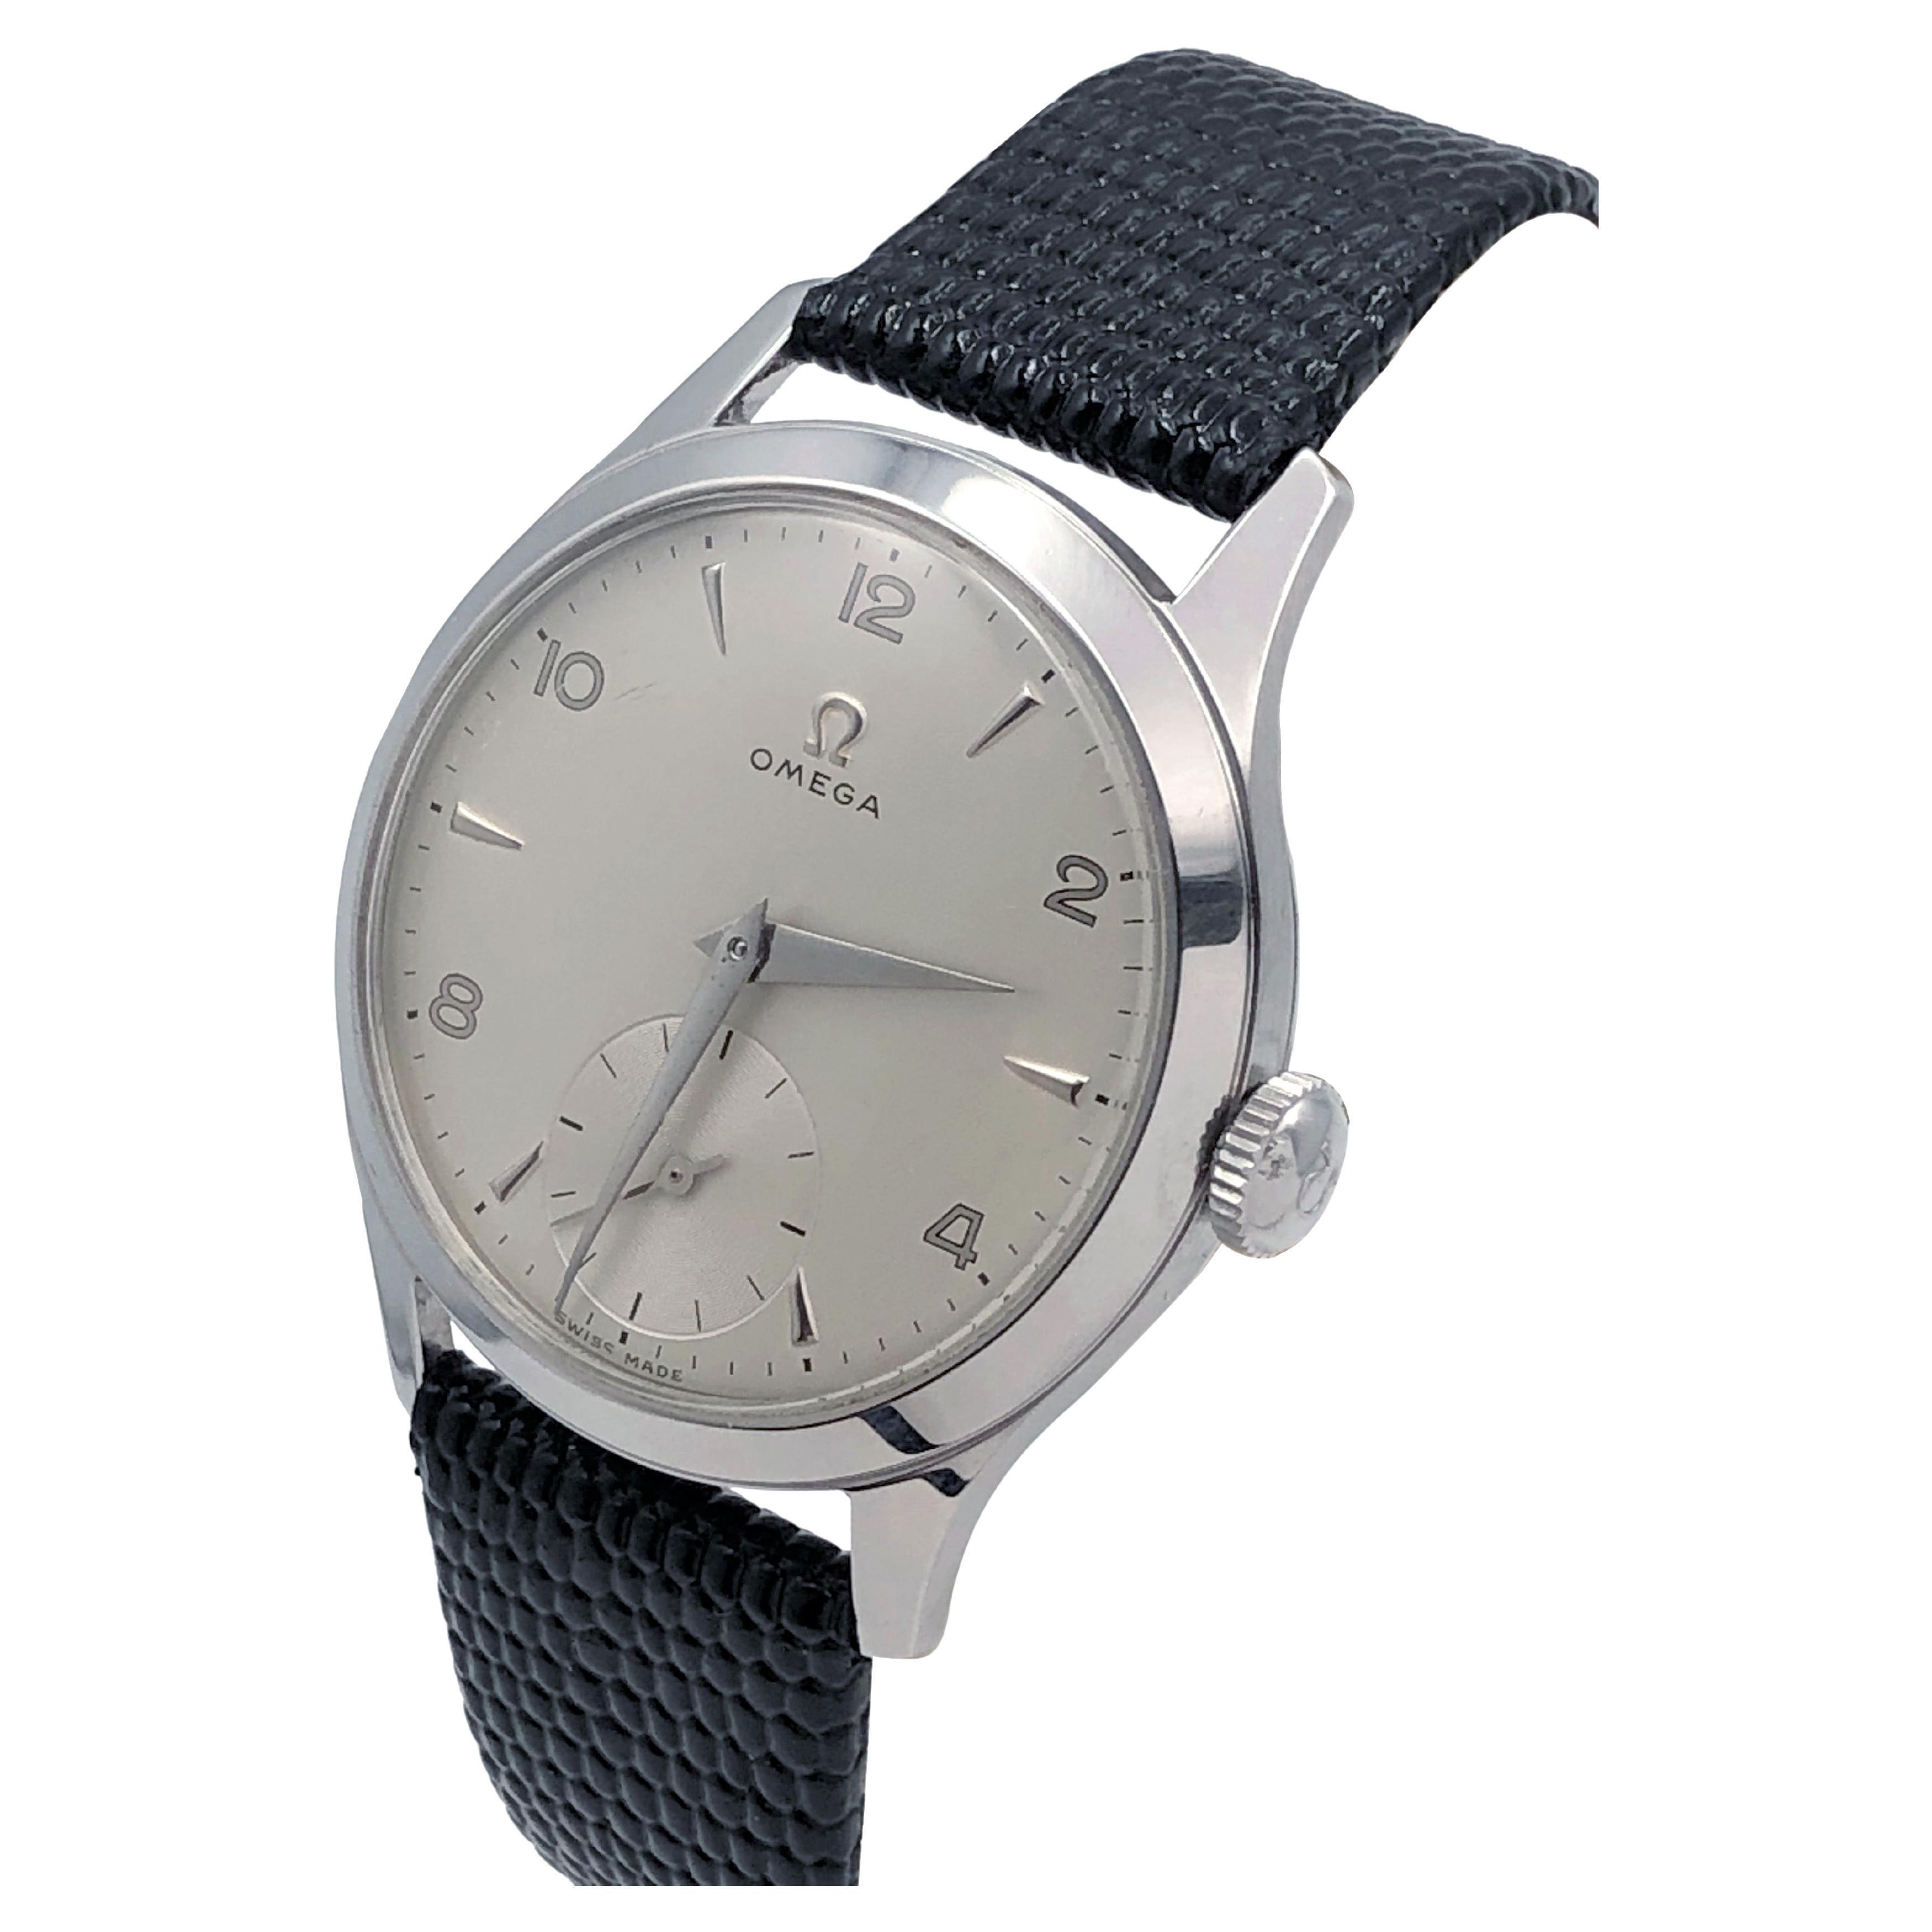 Omega Vintage Stainless Steel Manual Wind Wrist Watch For Sale